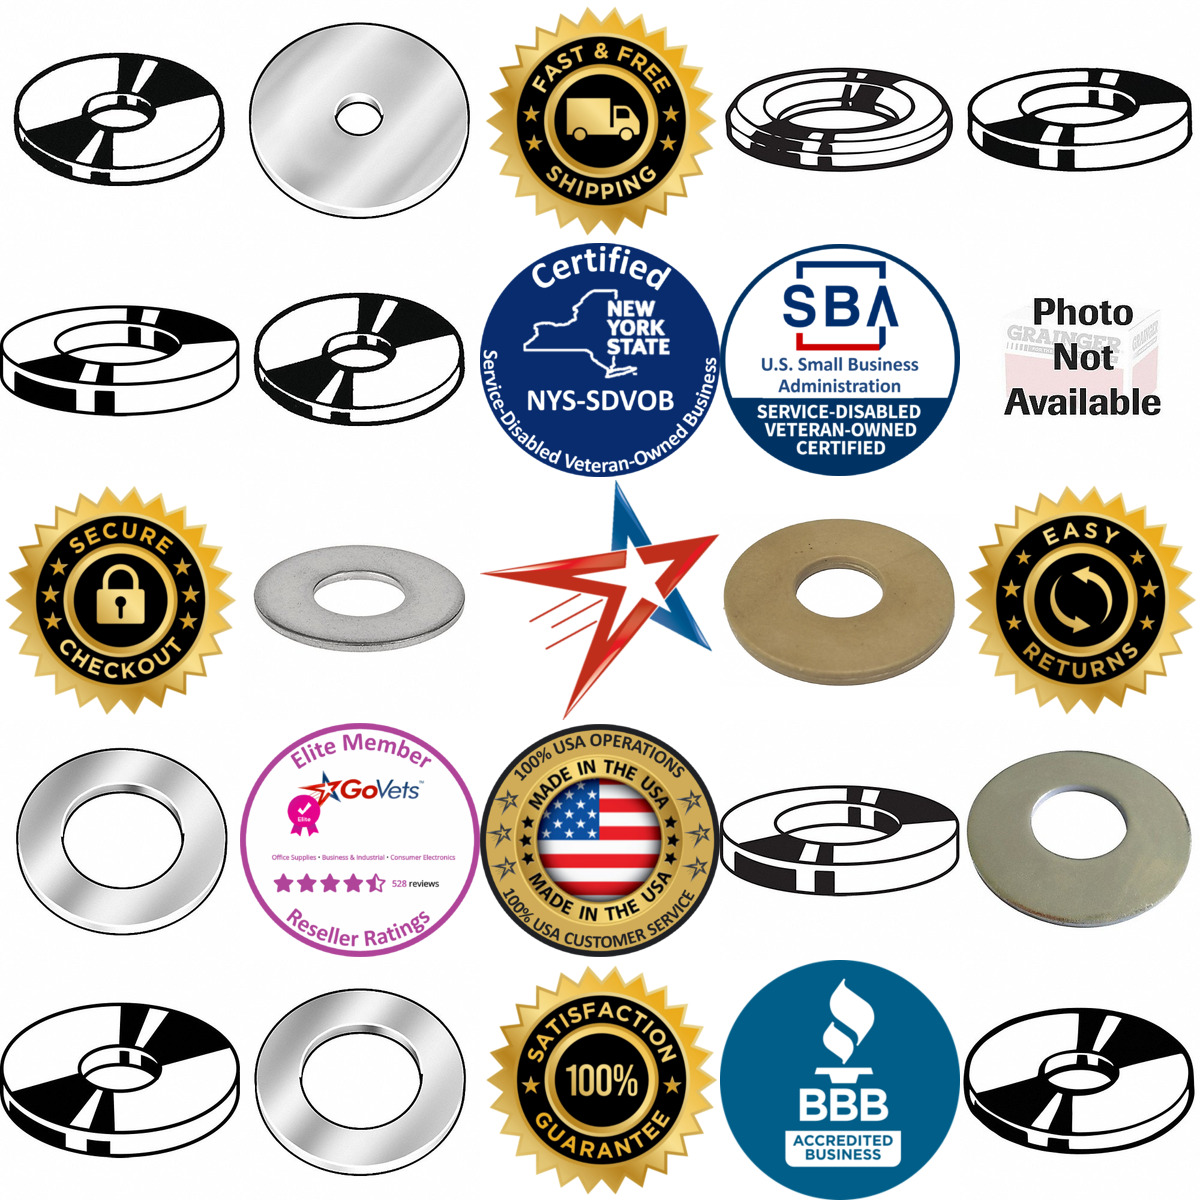 A selection of Flat Washers products on GoVets